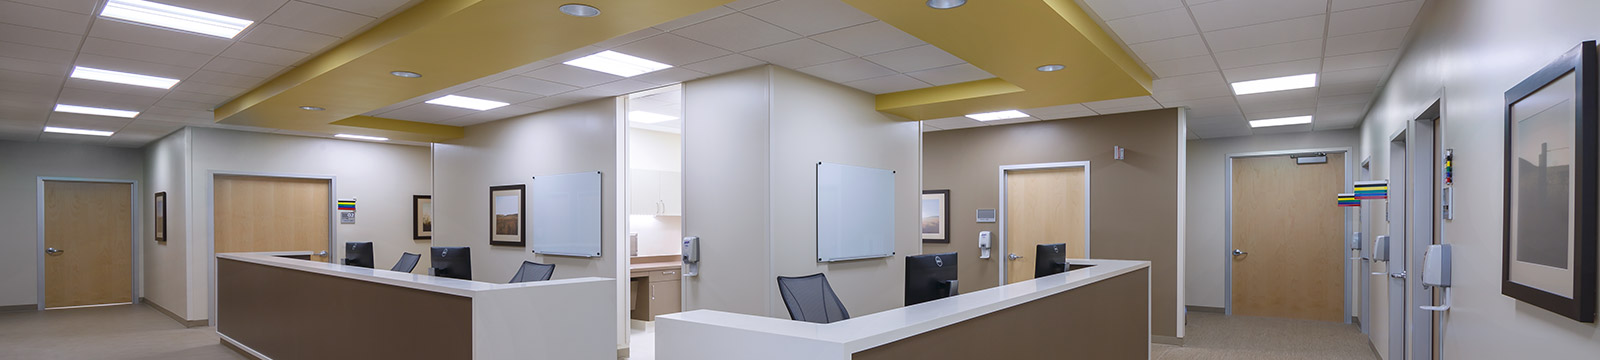 Large Image of an empty reception area you will find at your doctors office.